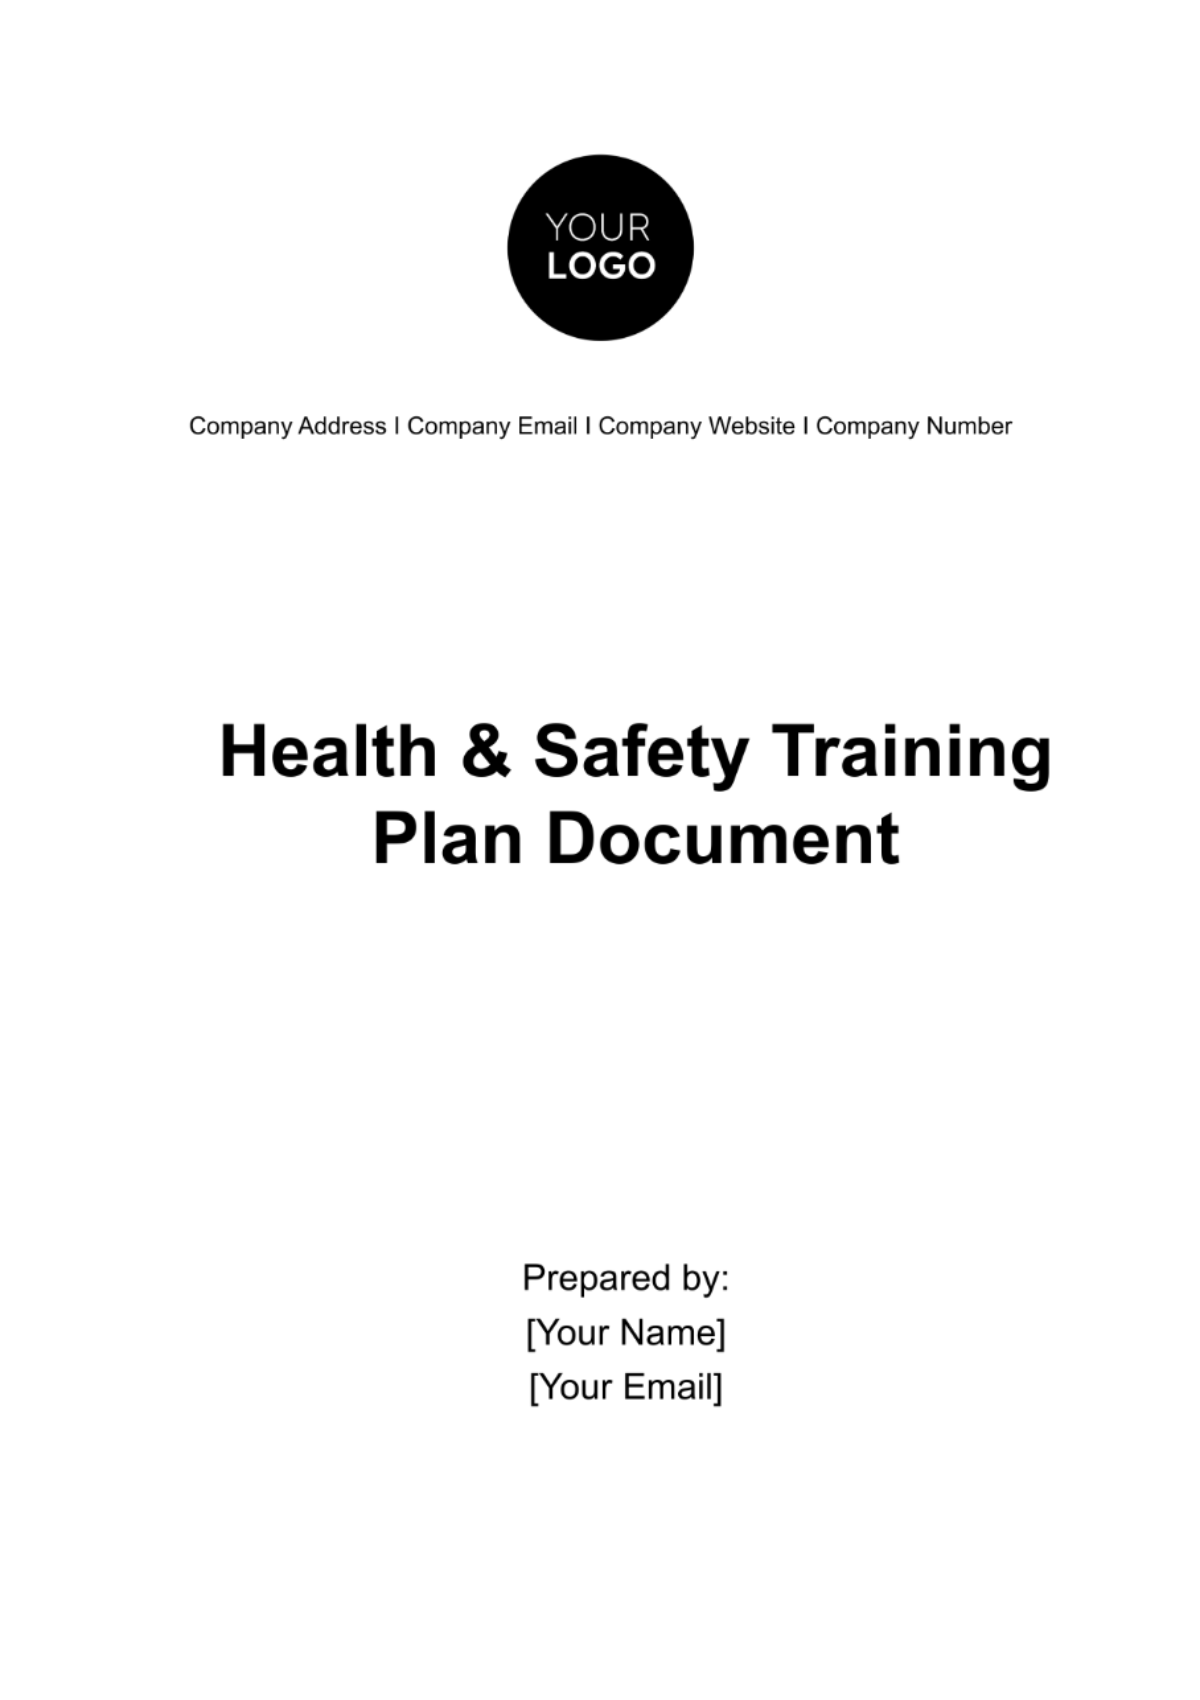 Free Health & Safety Training Plan Document Template